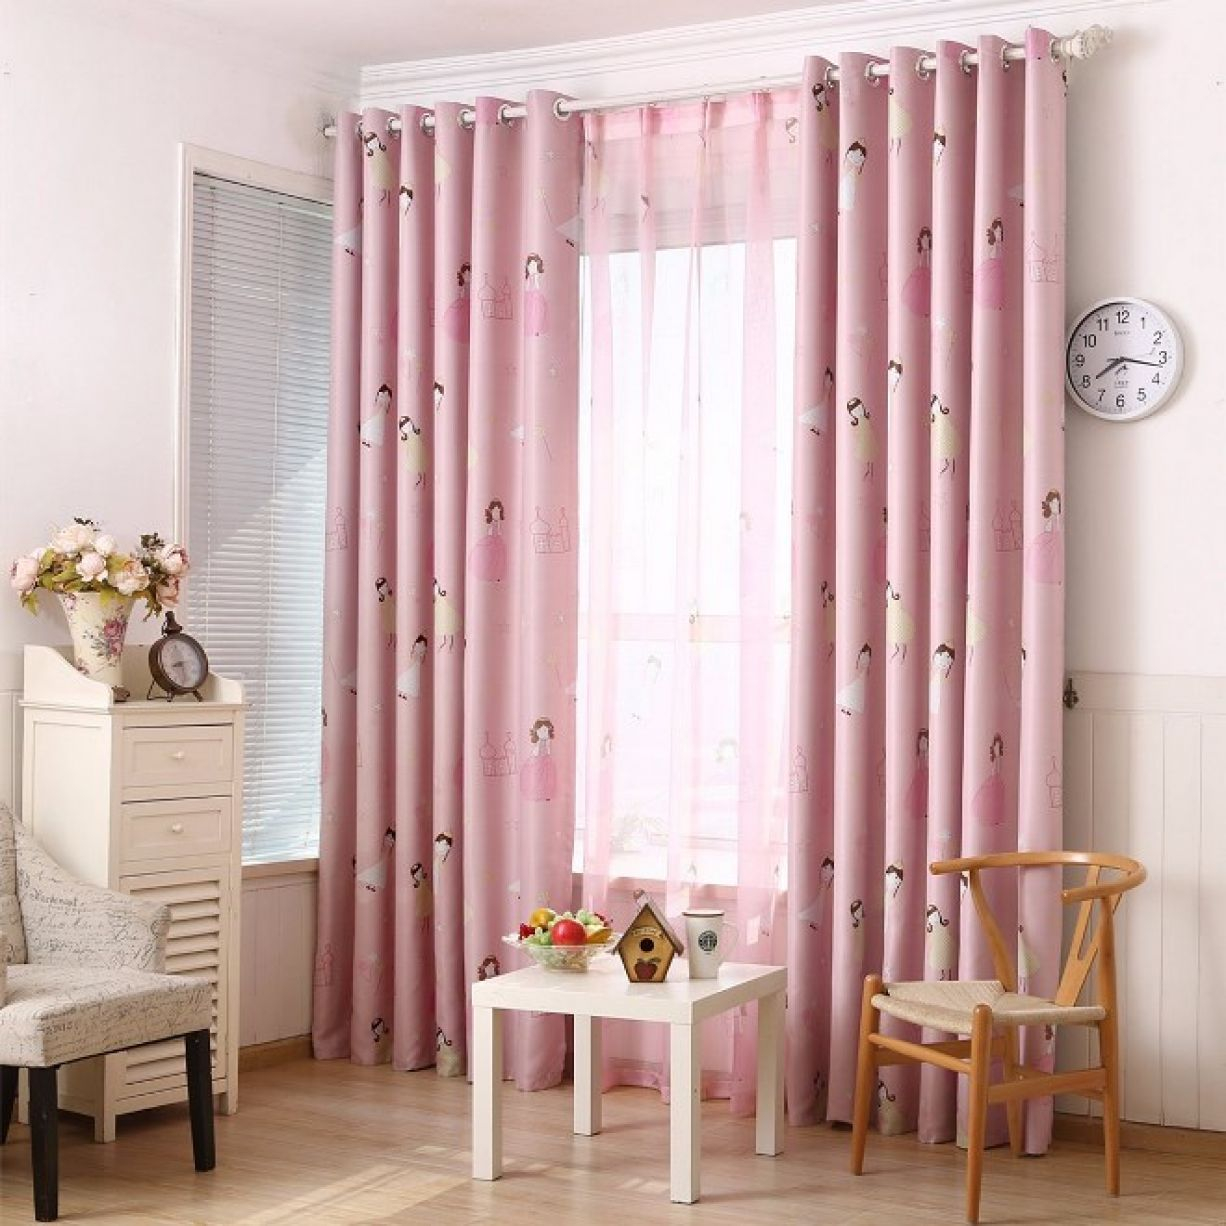 Curtains for children's rooms